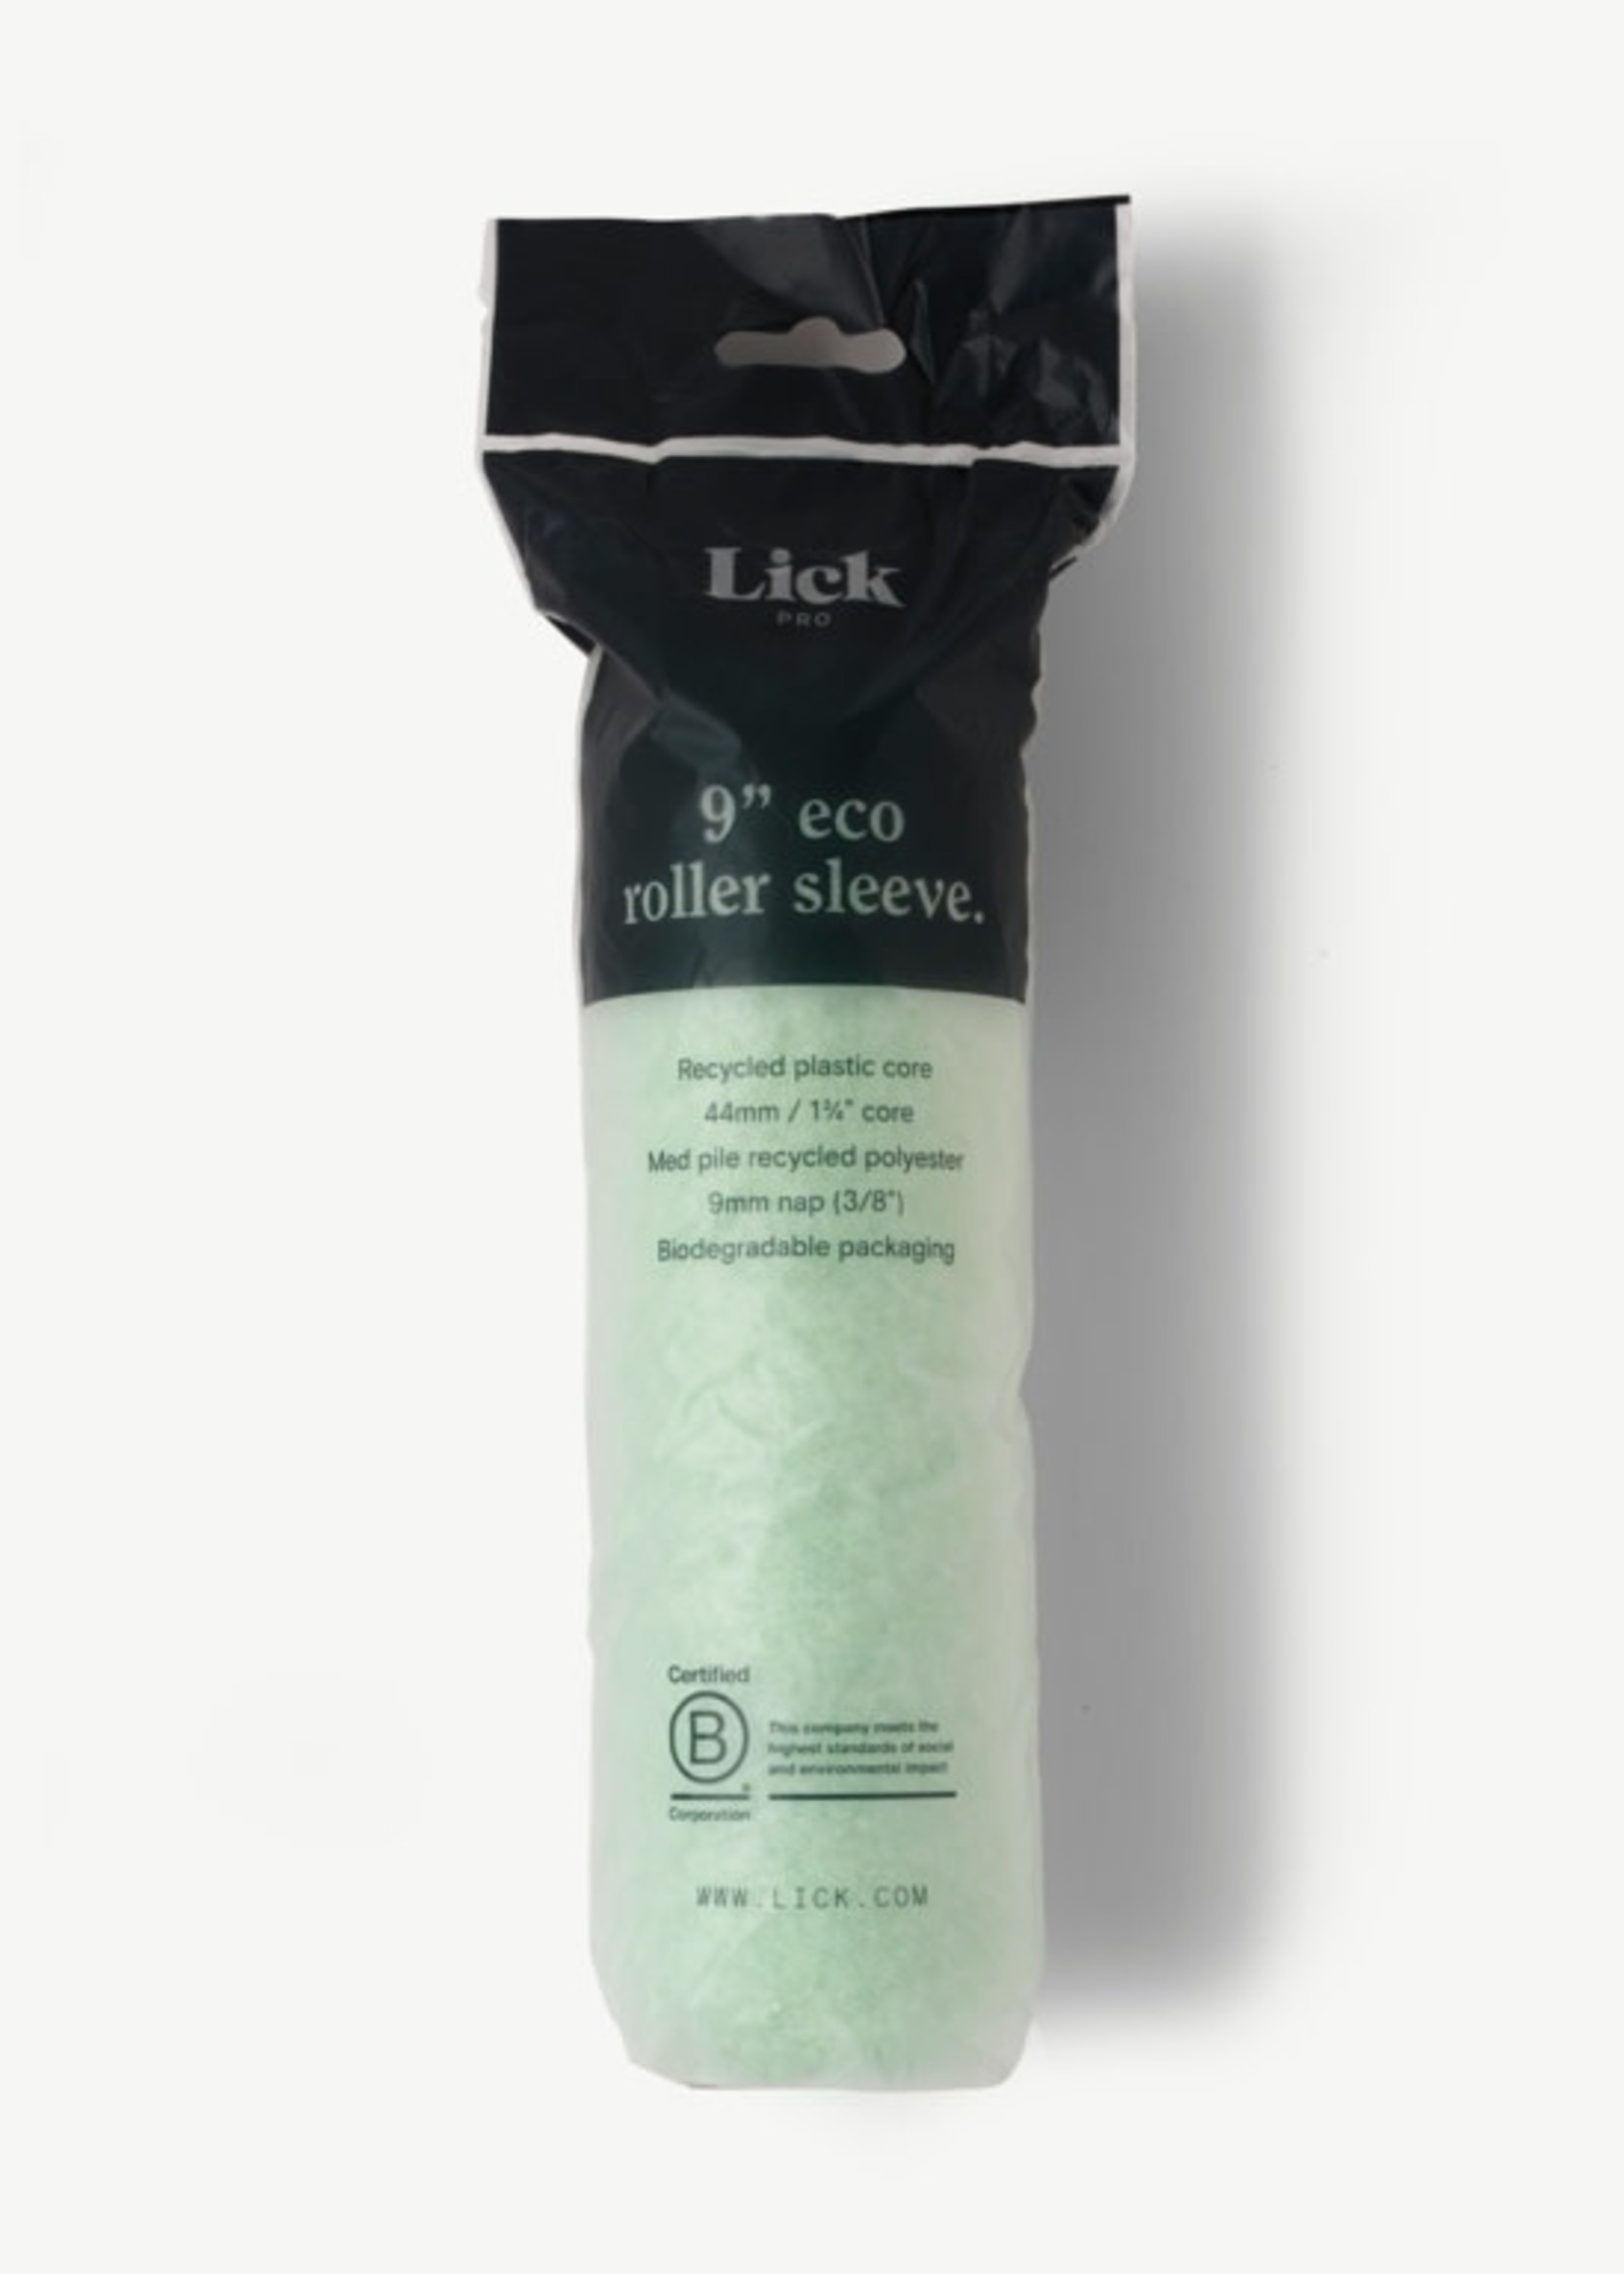 Lick Pro Eco Mid Pile Roller Sleeve 9"